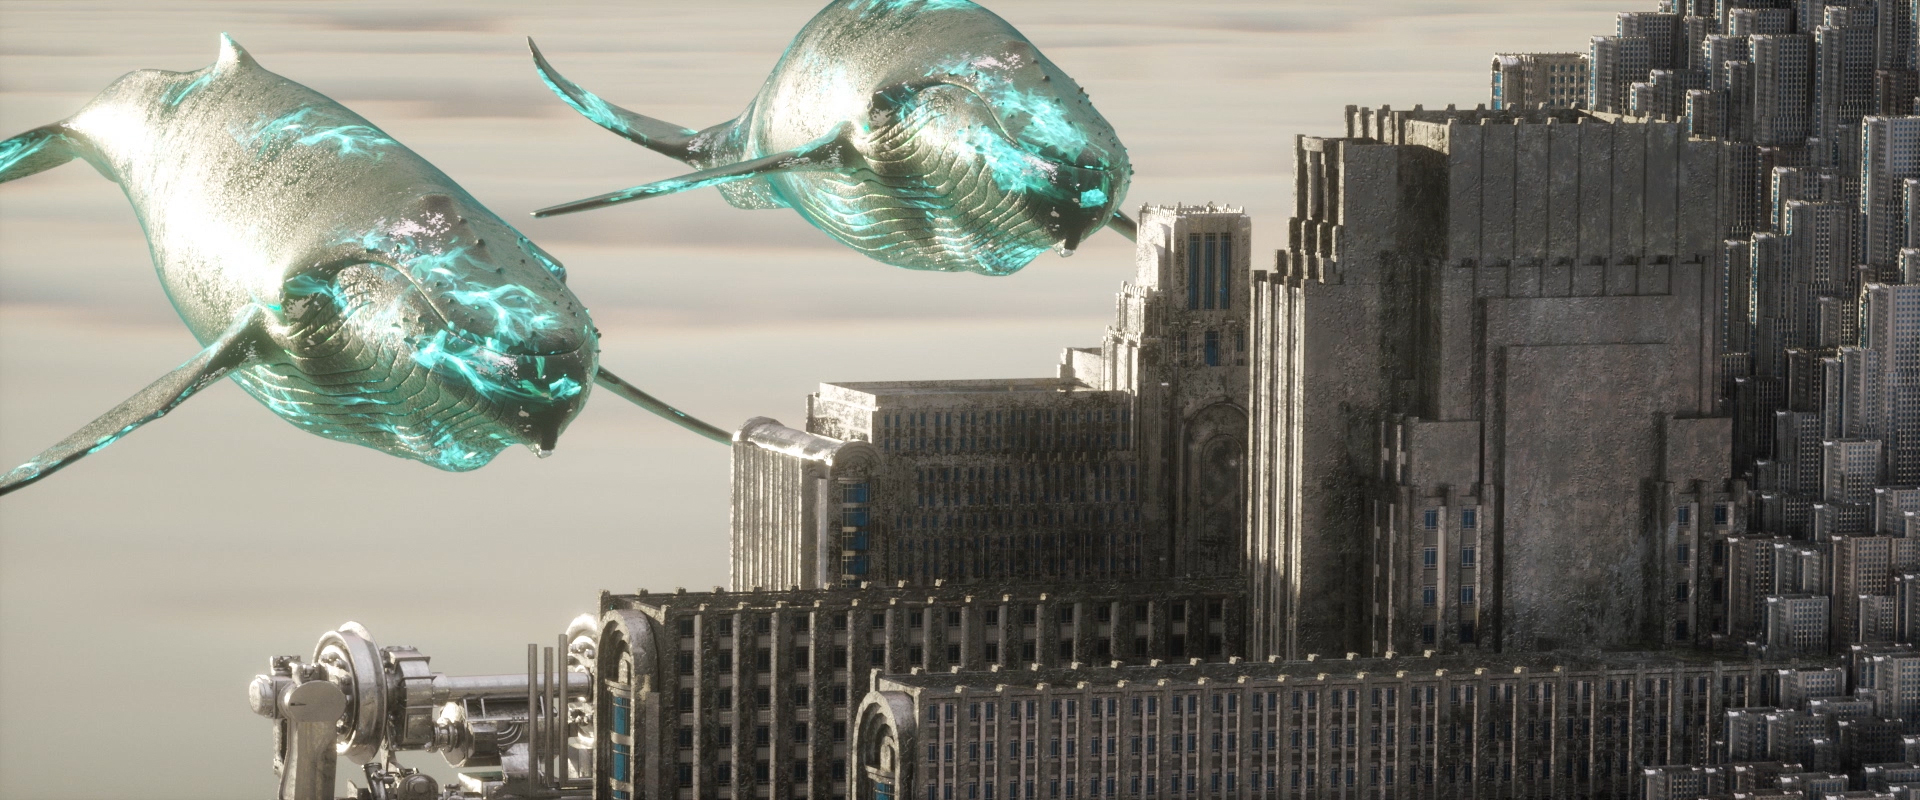 Whales approaching the cloud city